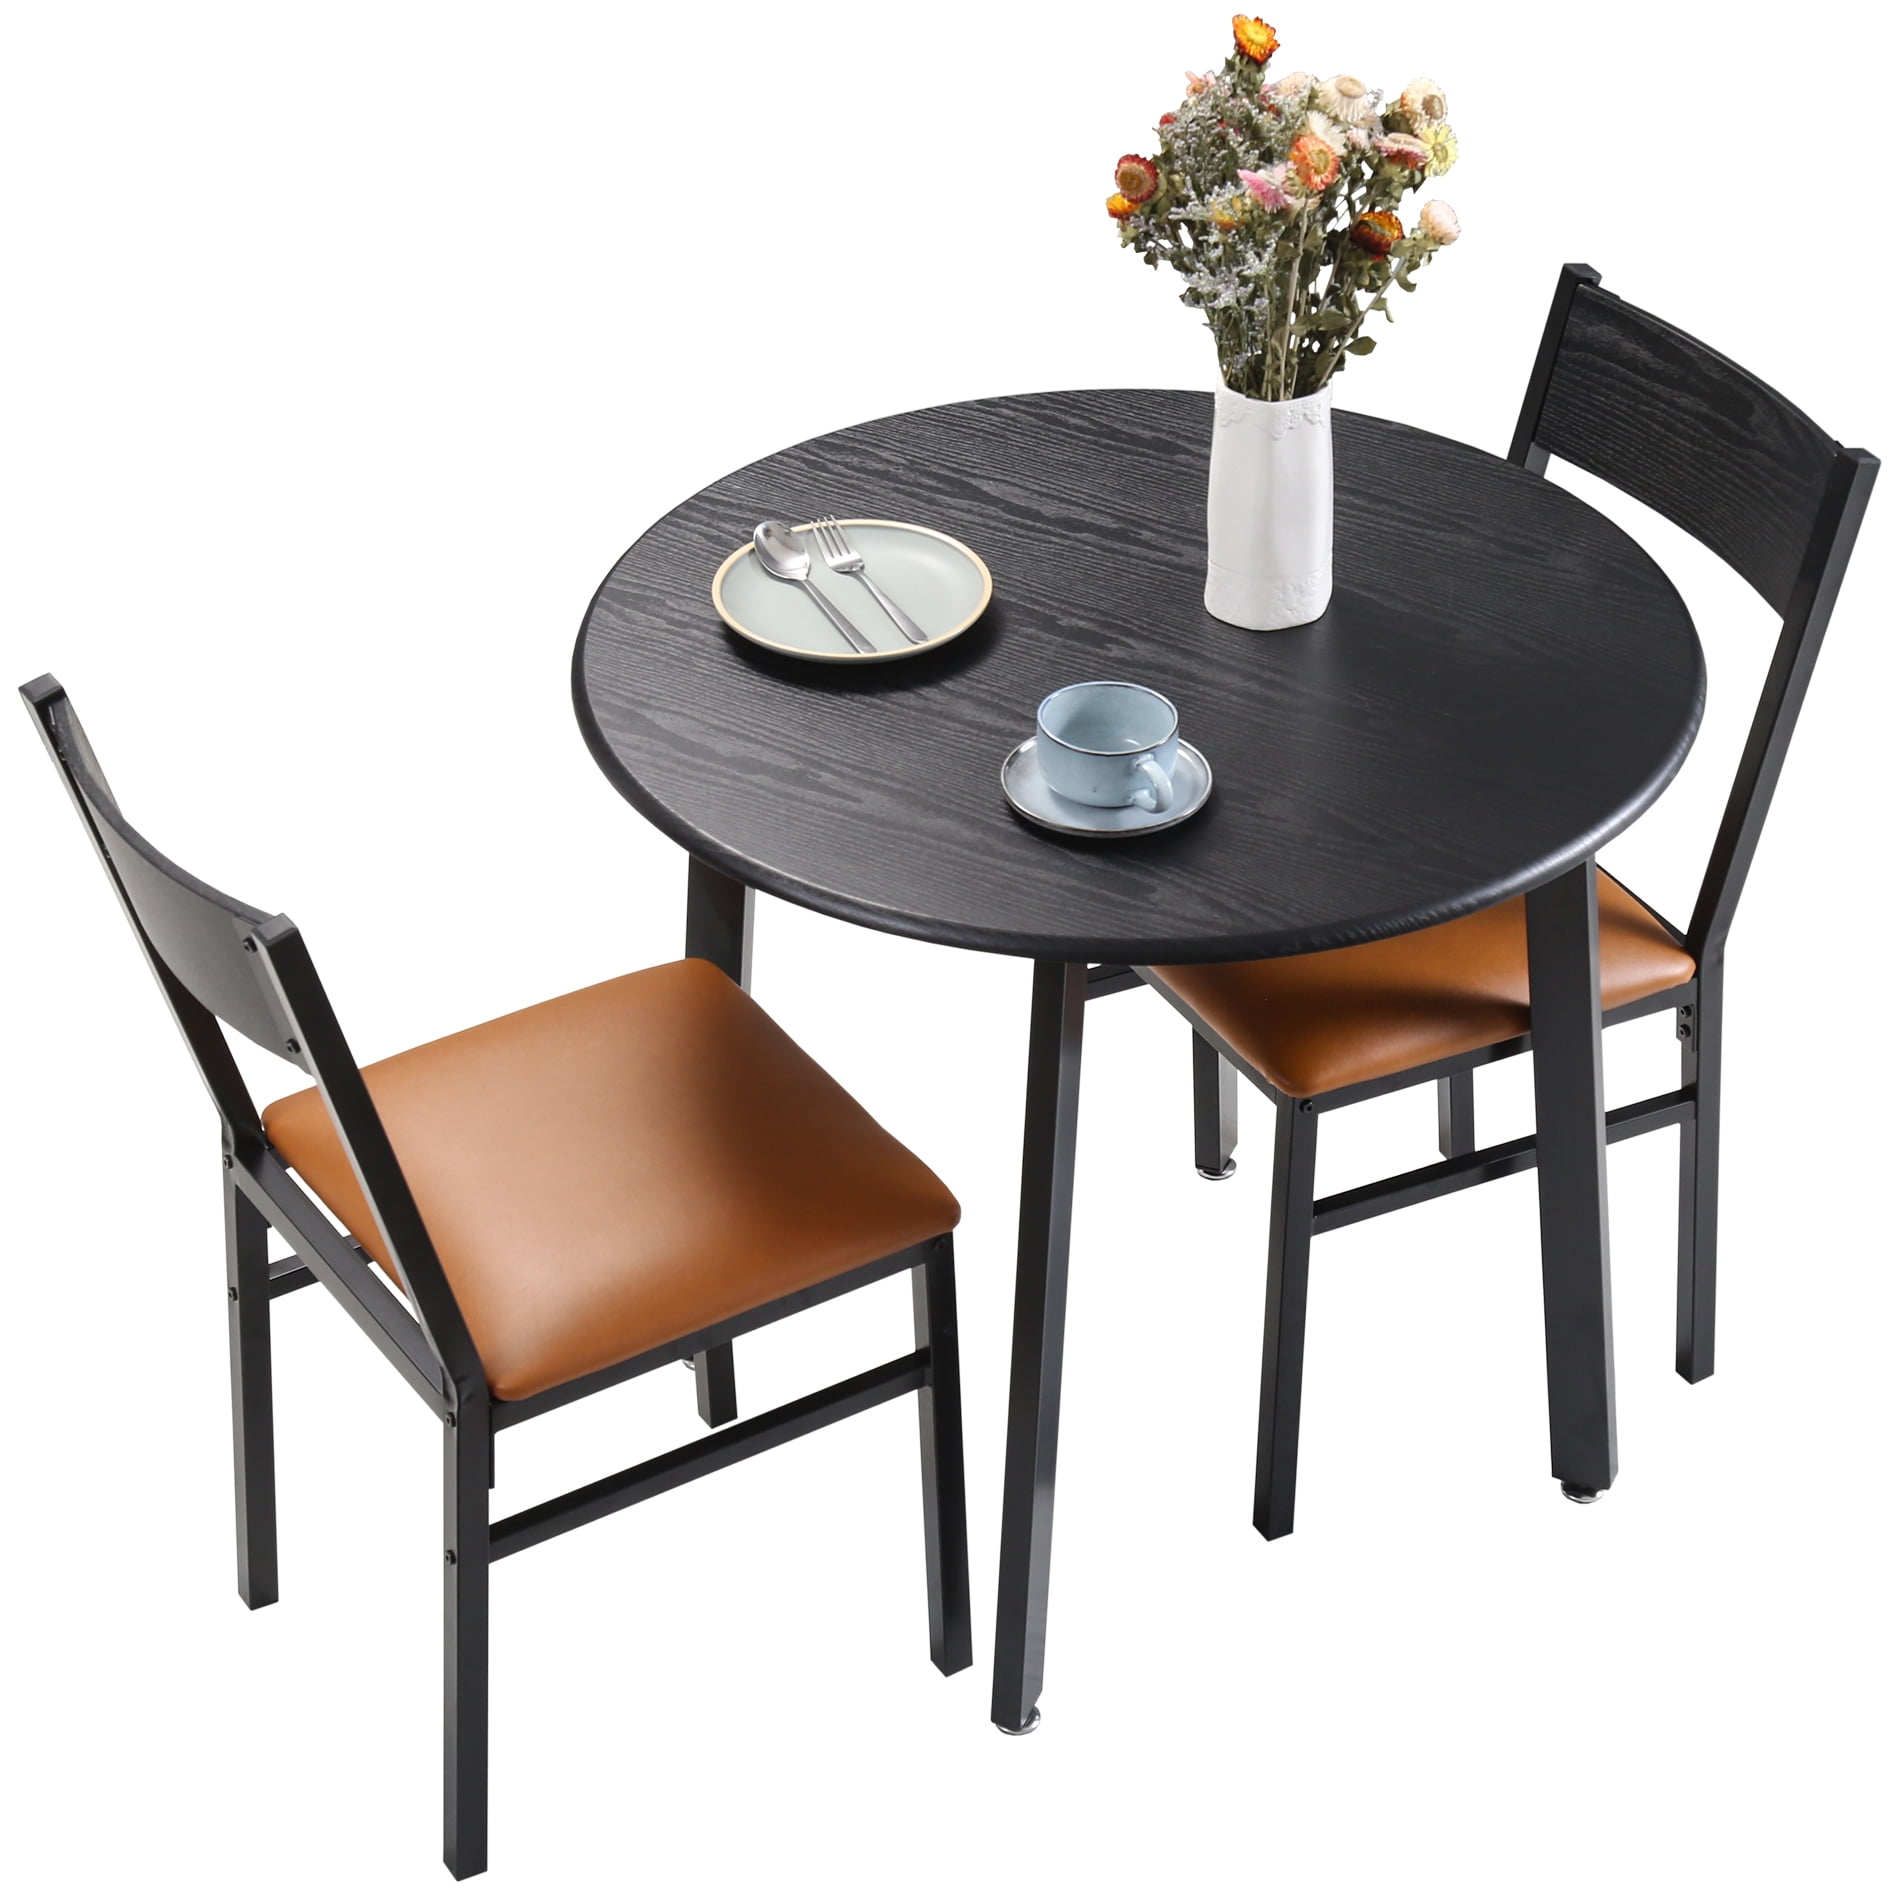 3 Piece Round Dining Table Set With, Small Round Dining Table Chairs